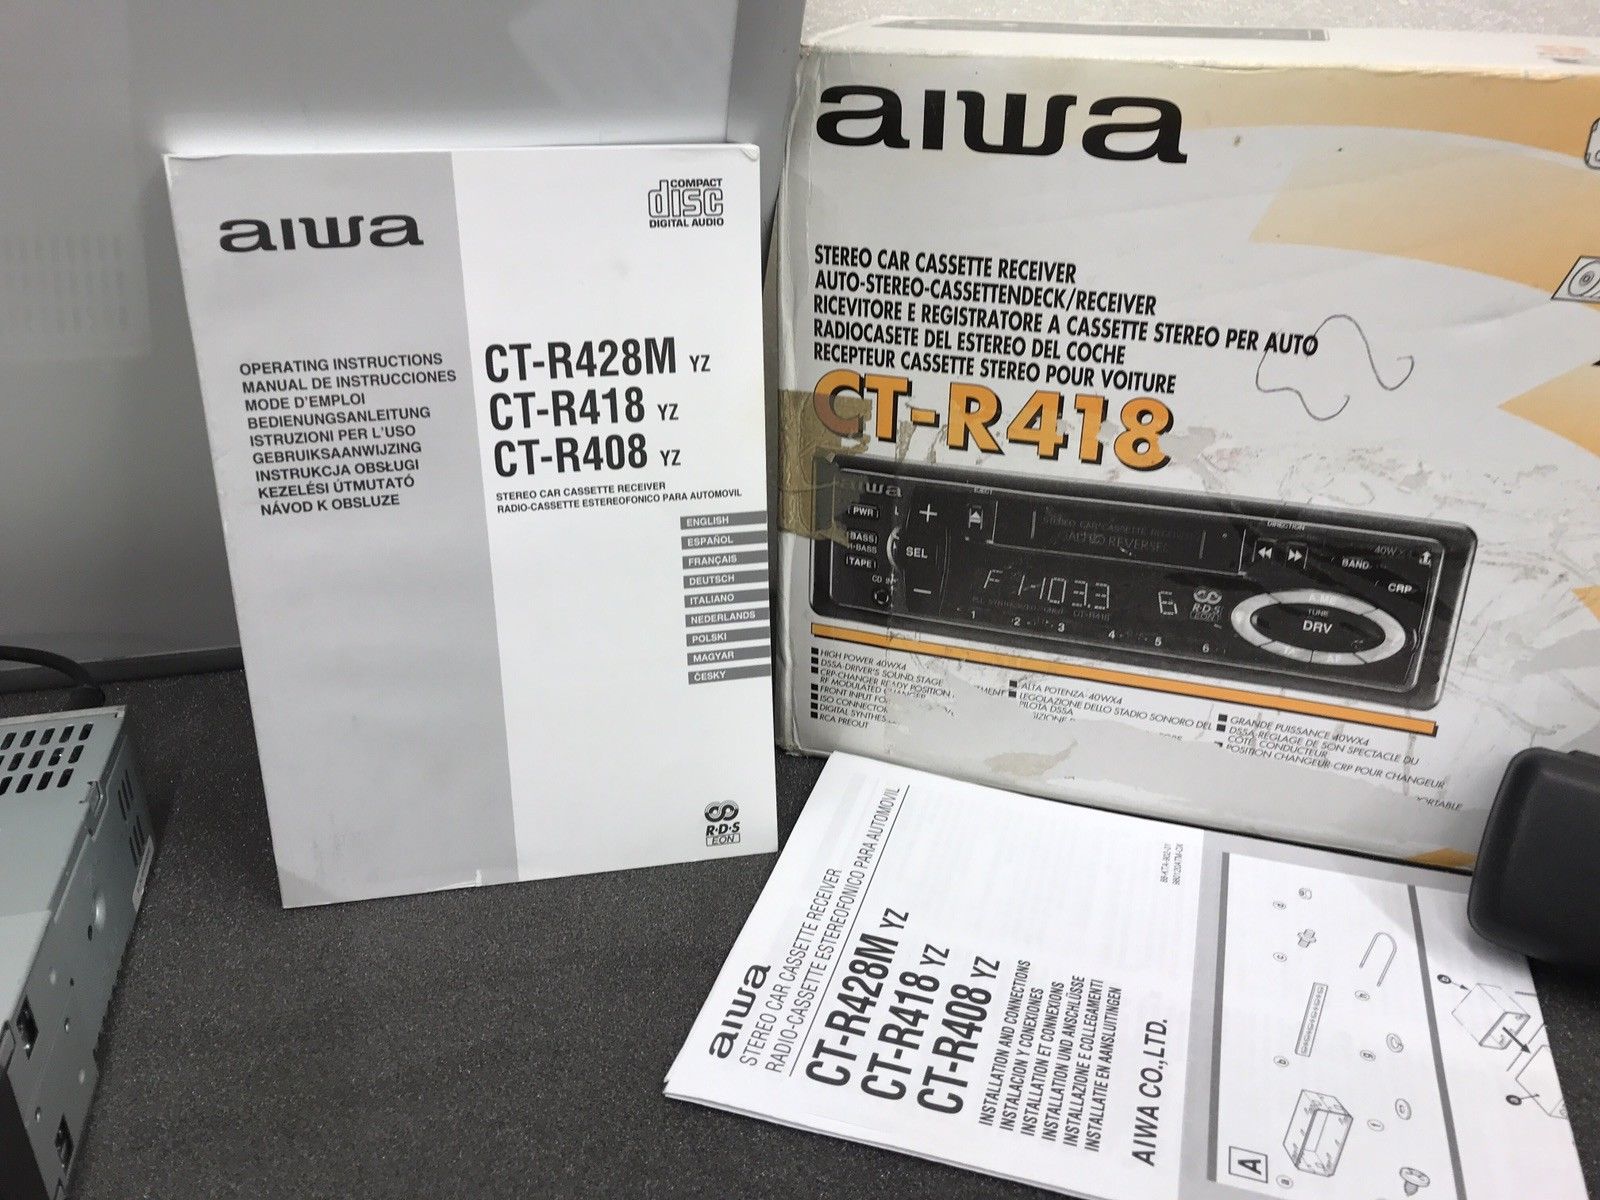 Old Boxed Aiwa Car Radio Stereo Cassette Player With Front Aux In Socket